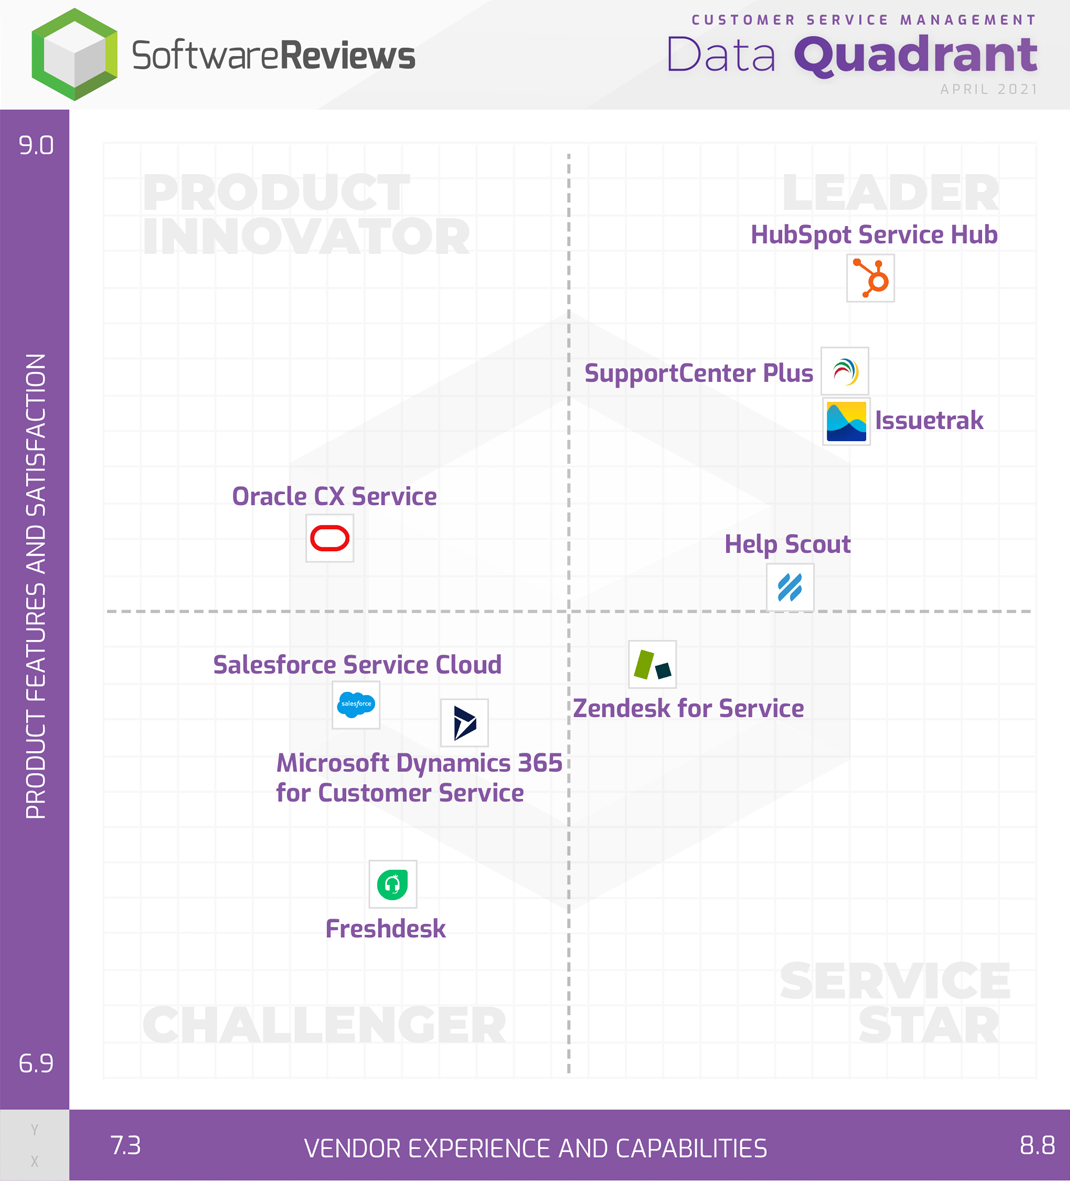 HubSpot Service Hub is the leader in Software Reviews DQ